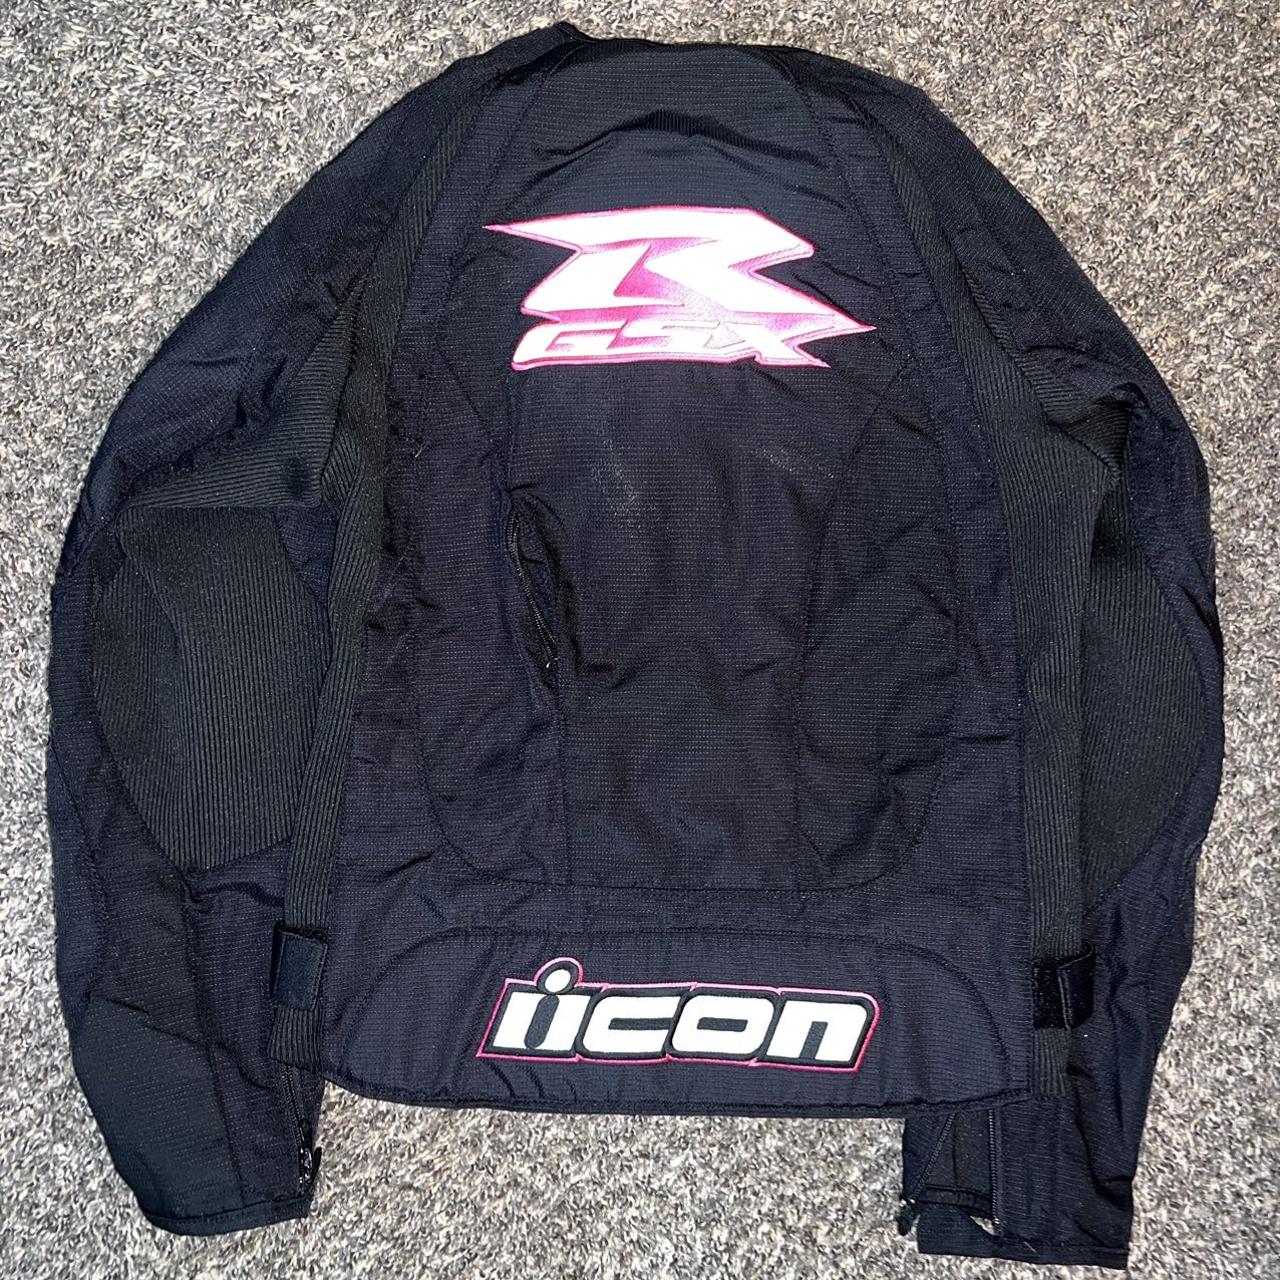 Icon Brand Women's Black and Pink Jacket (2)